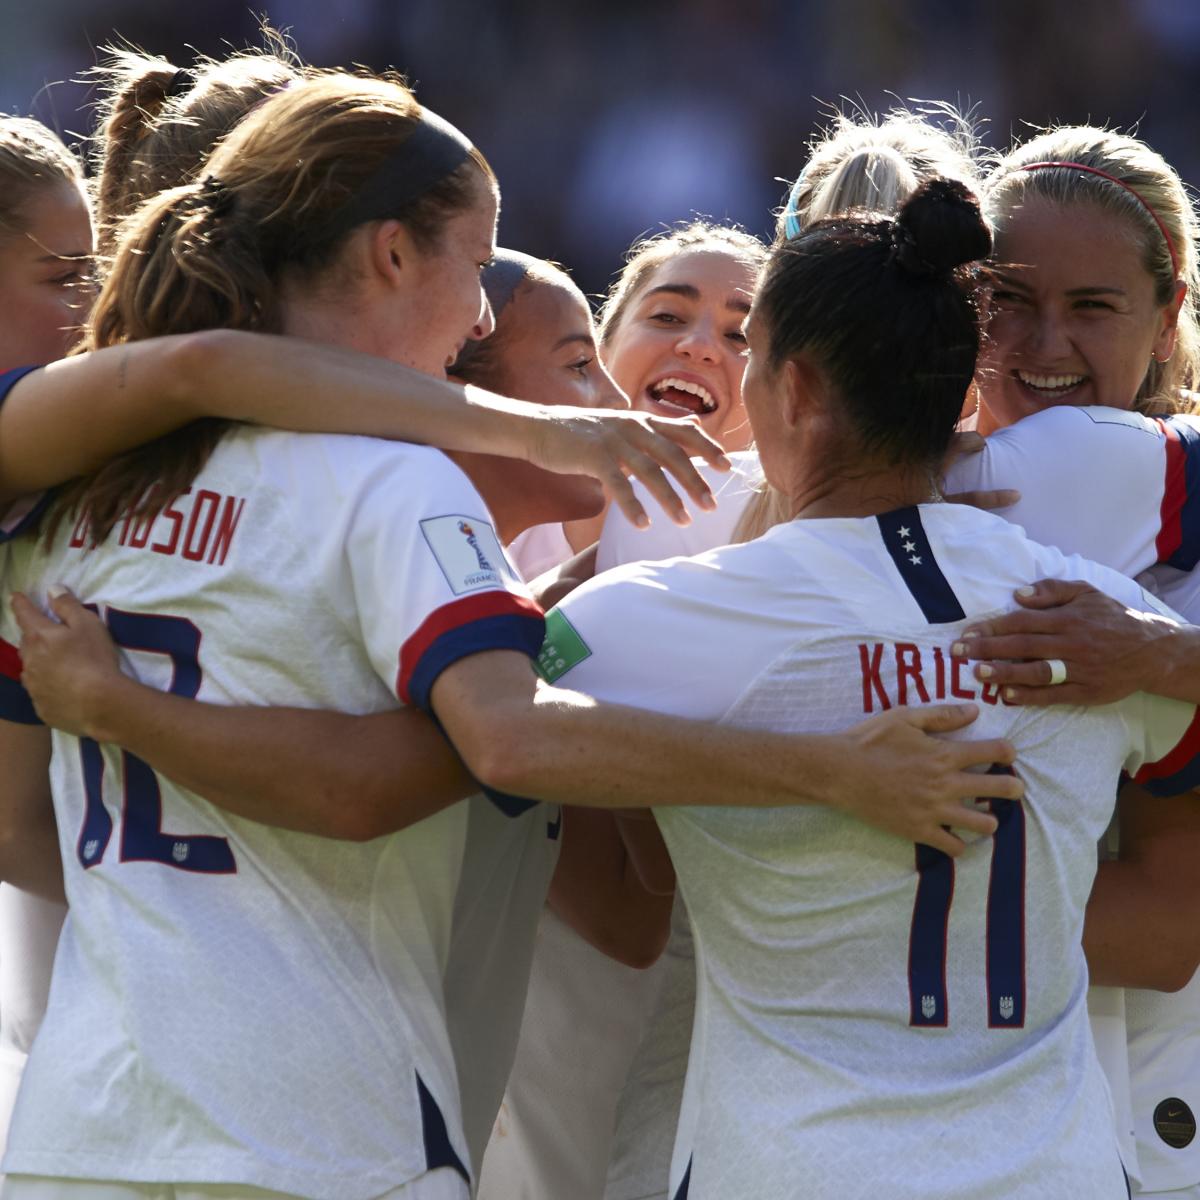 Women's World Cup Power Rankings After the Second Round of Group Games